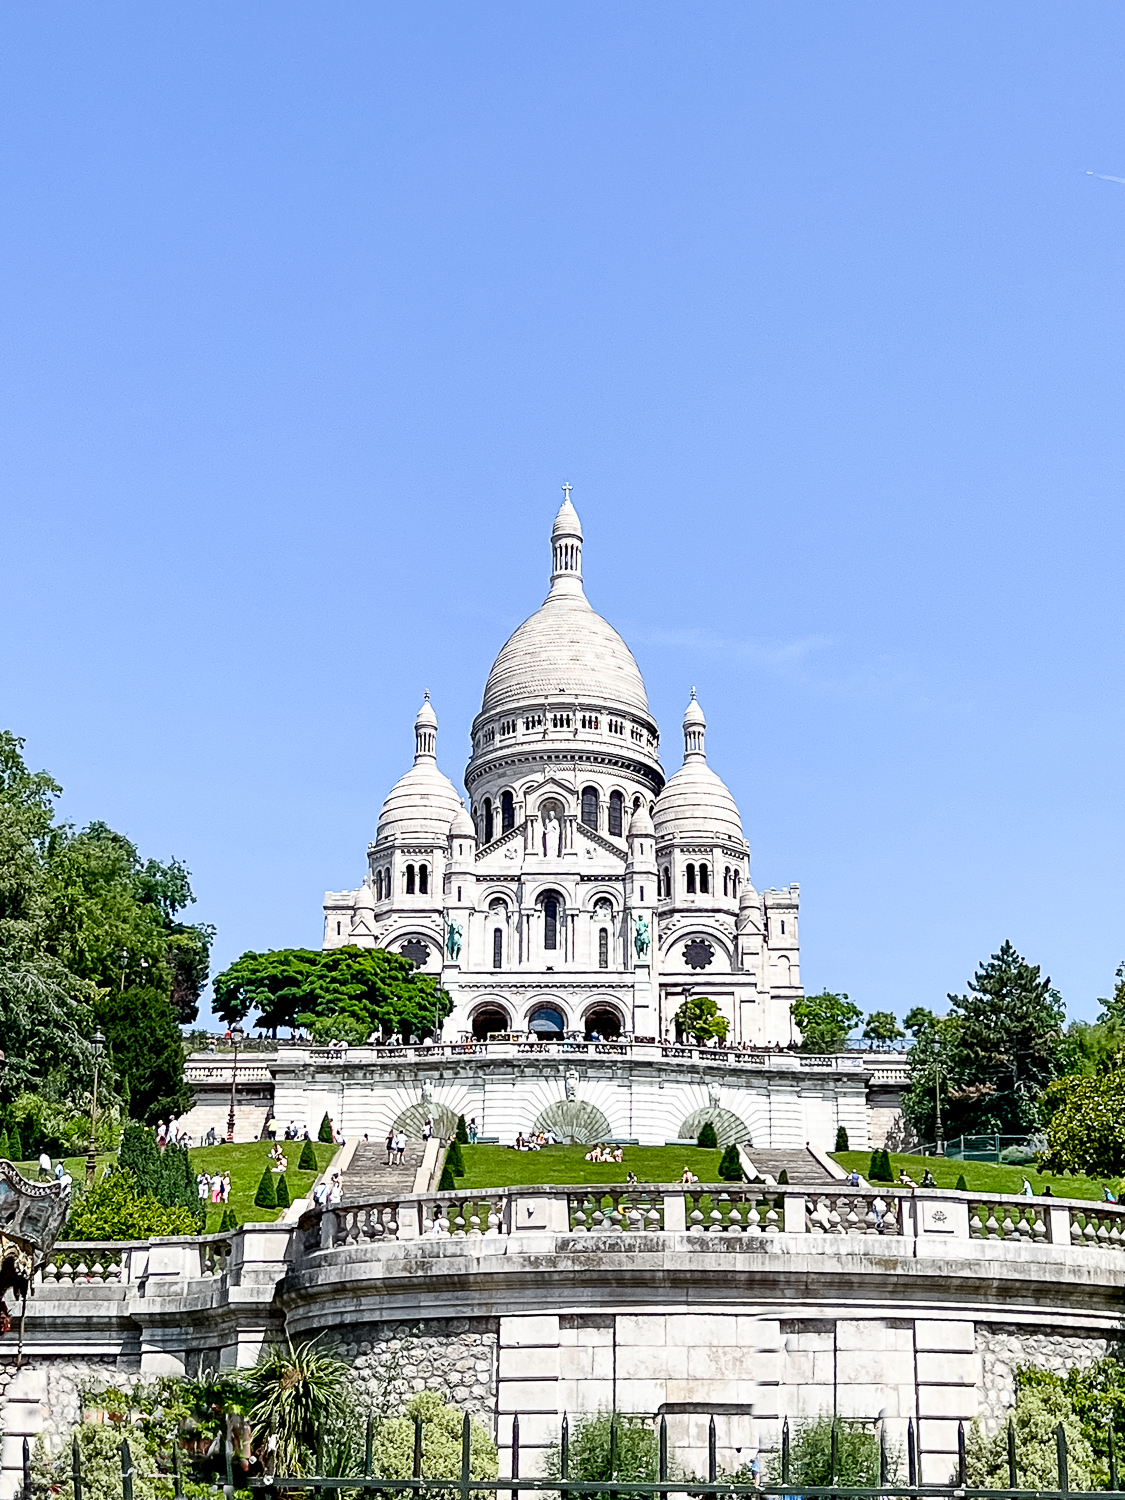 Pacific Globetrotters, budget family travel blog, shares 5 day itinerary in Paris with kids. Sacre Couer